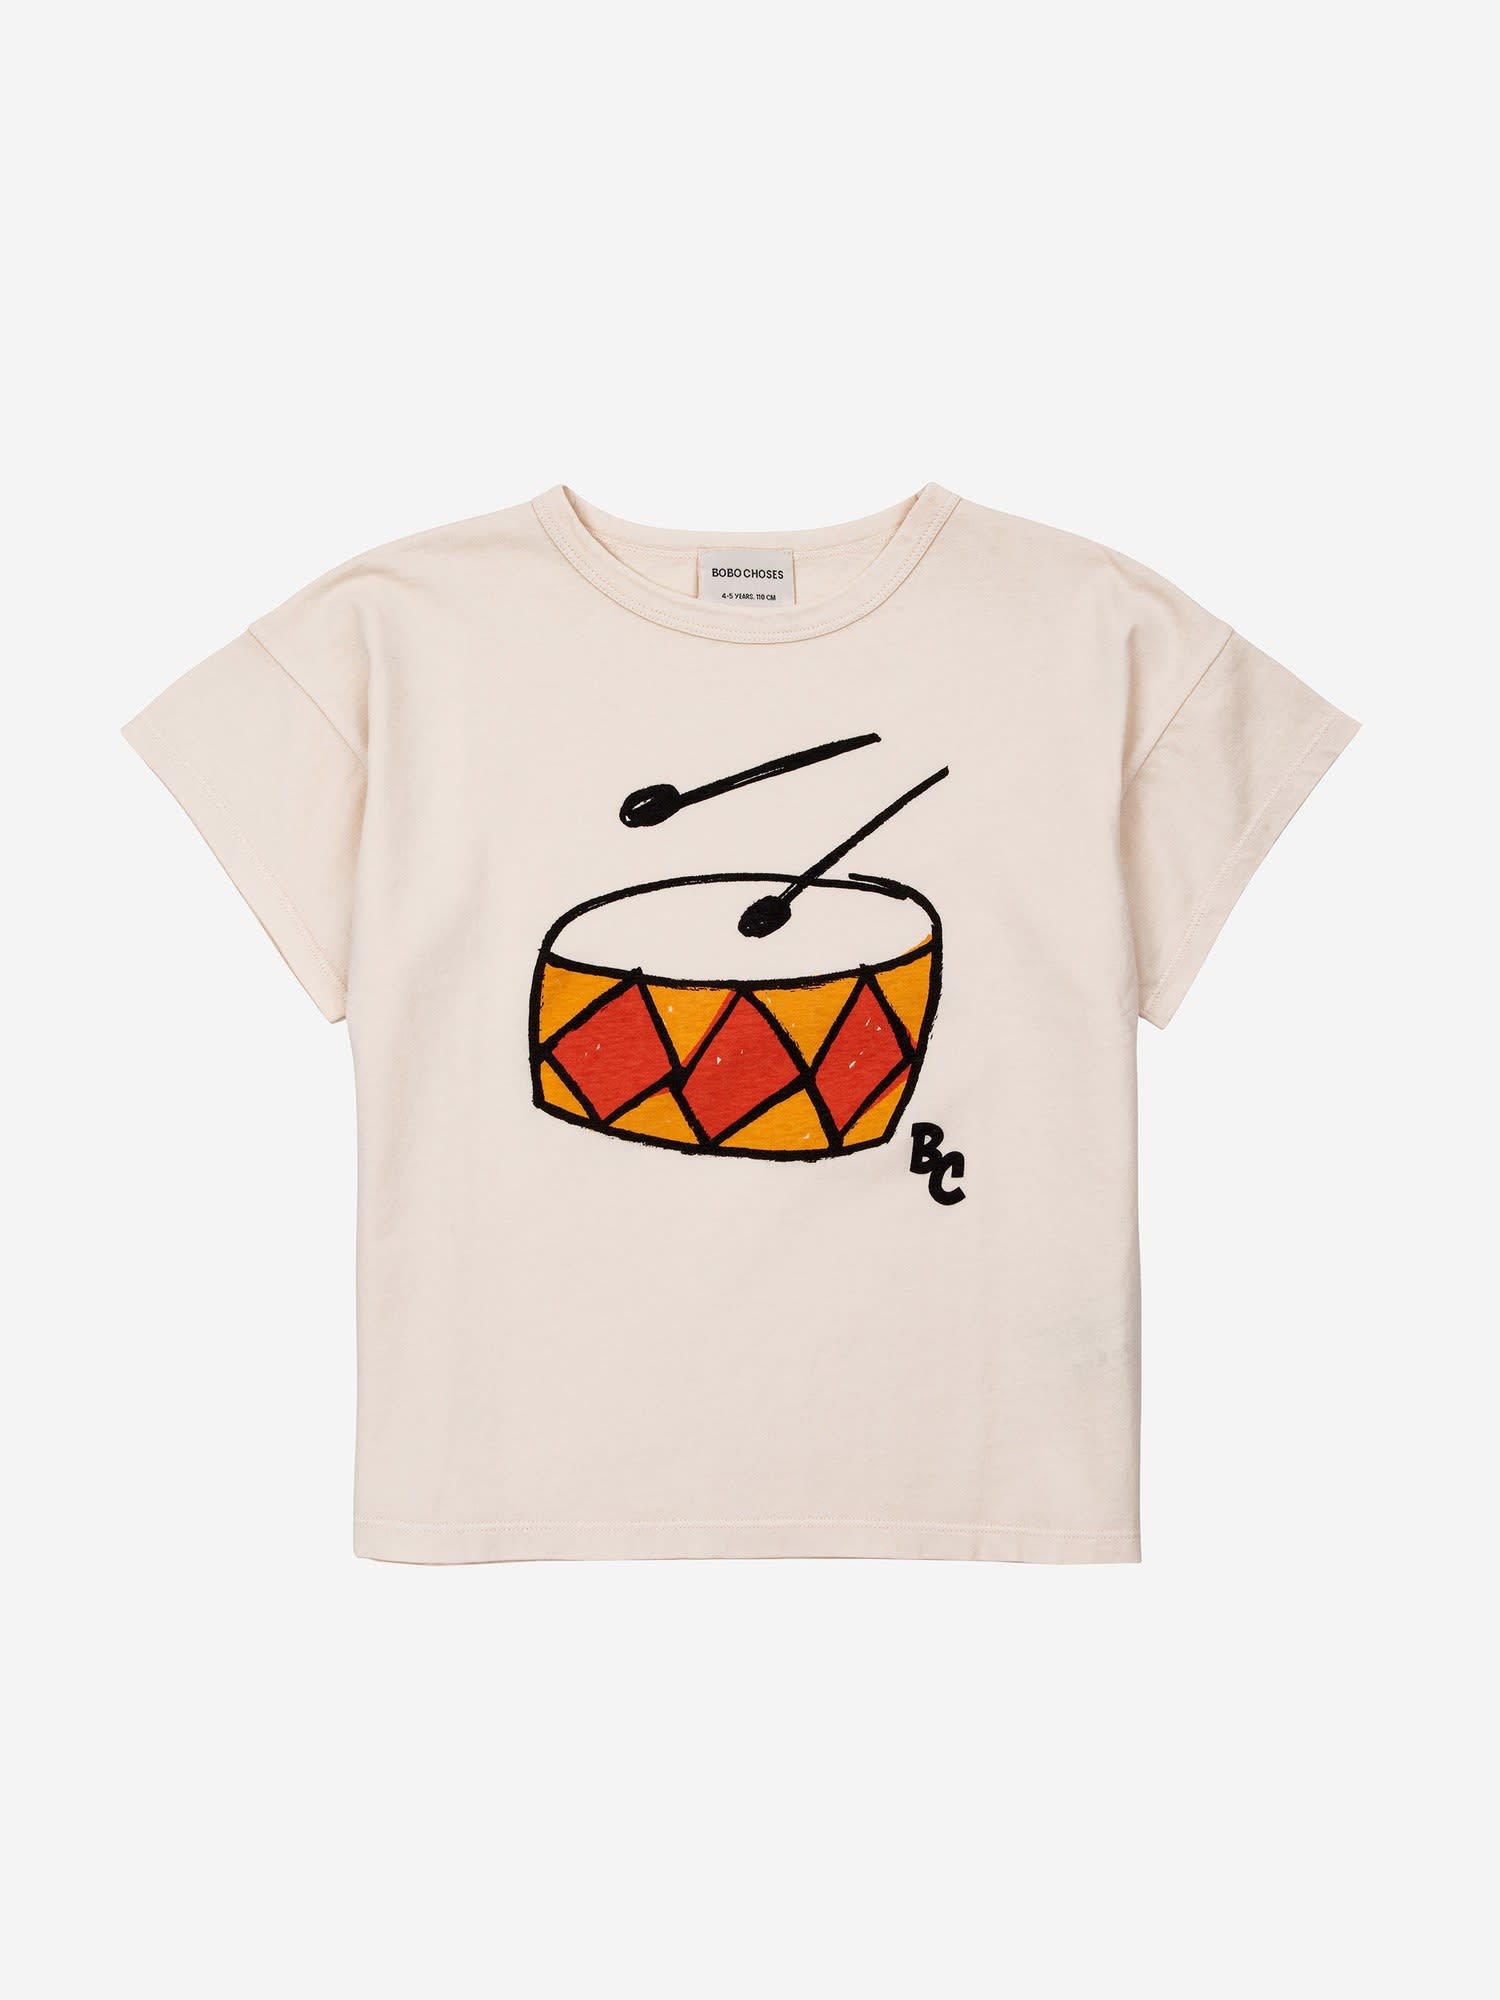 Bobo Choses Kids' Ivory T-shirt For Boy With Drum Print